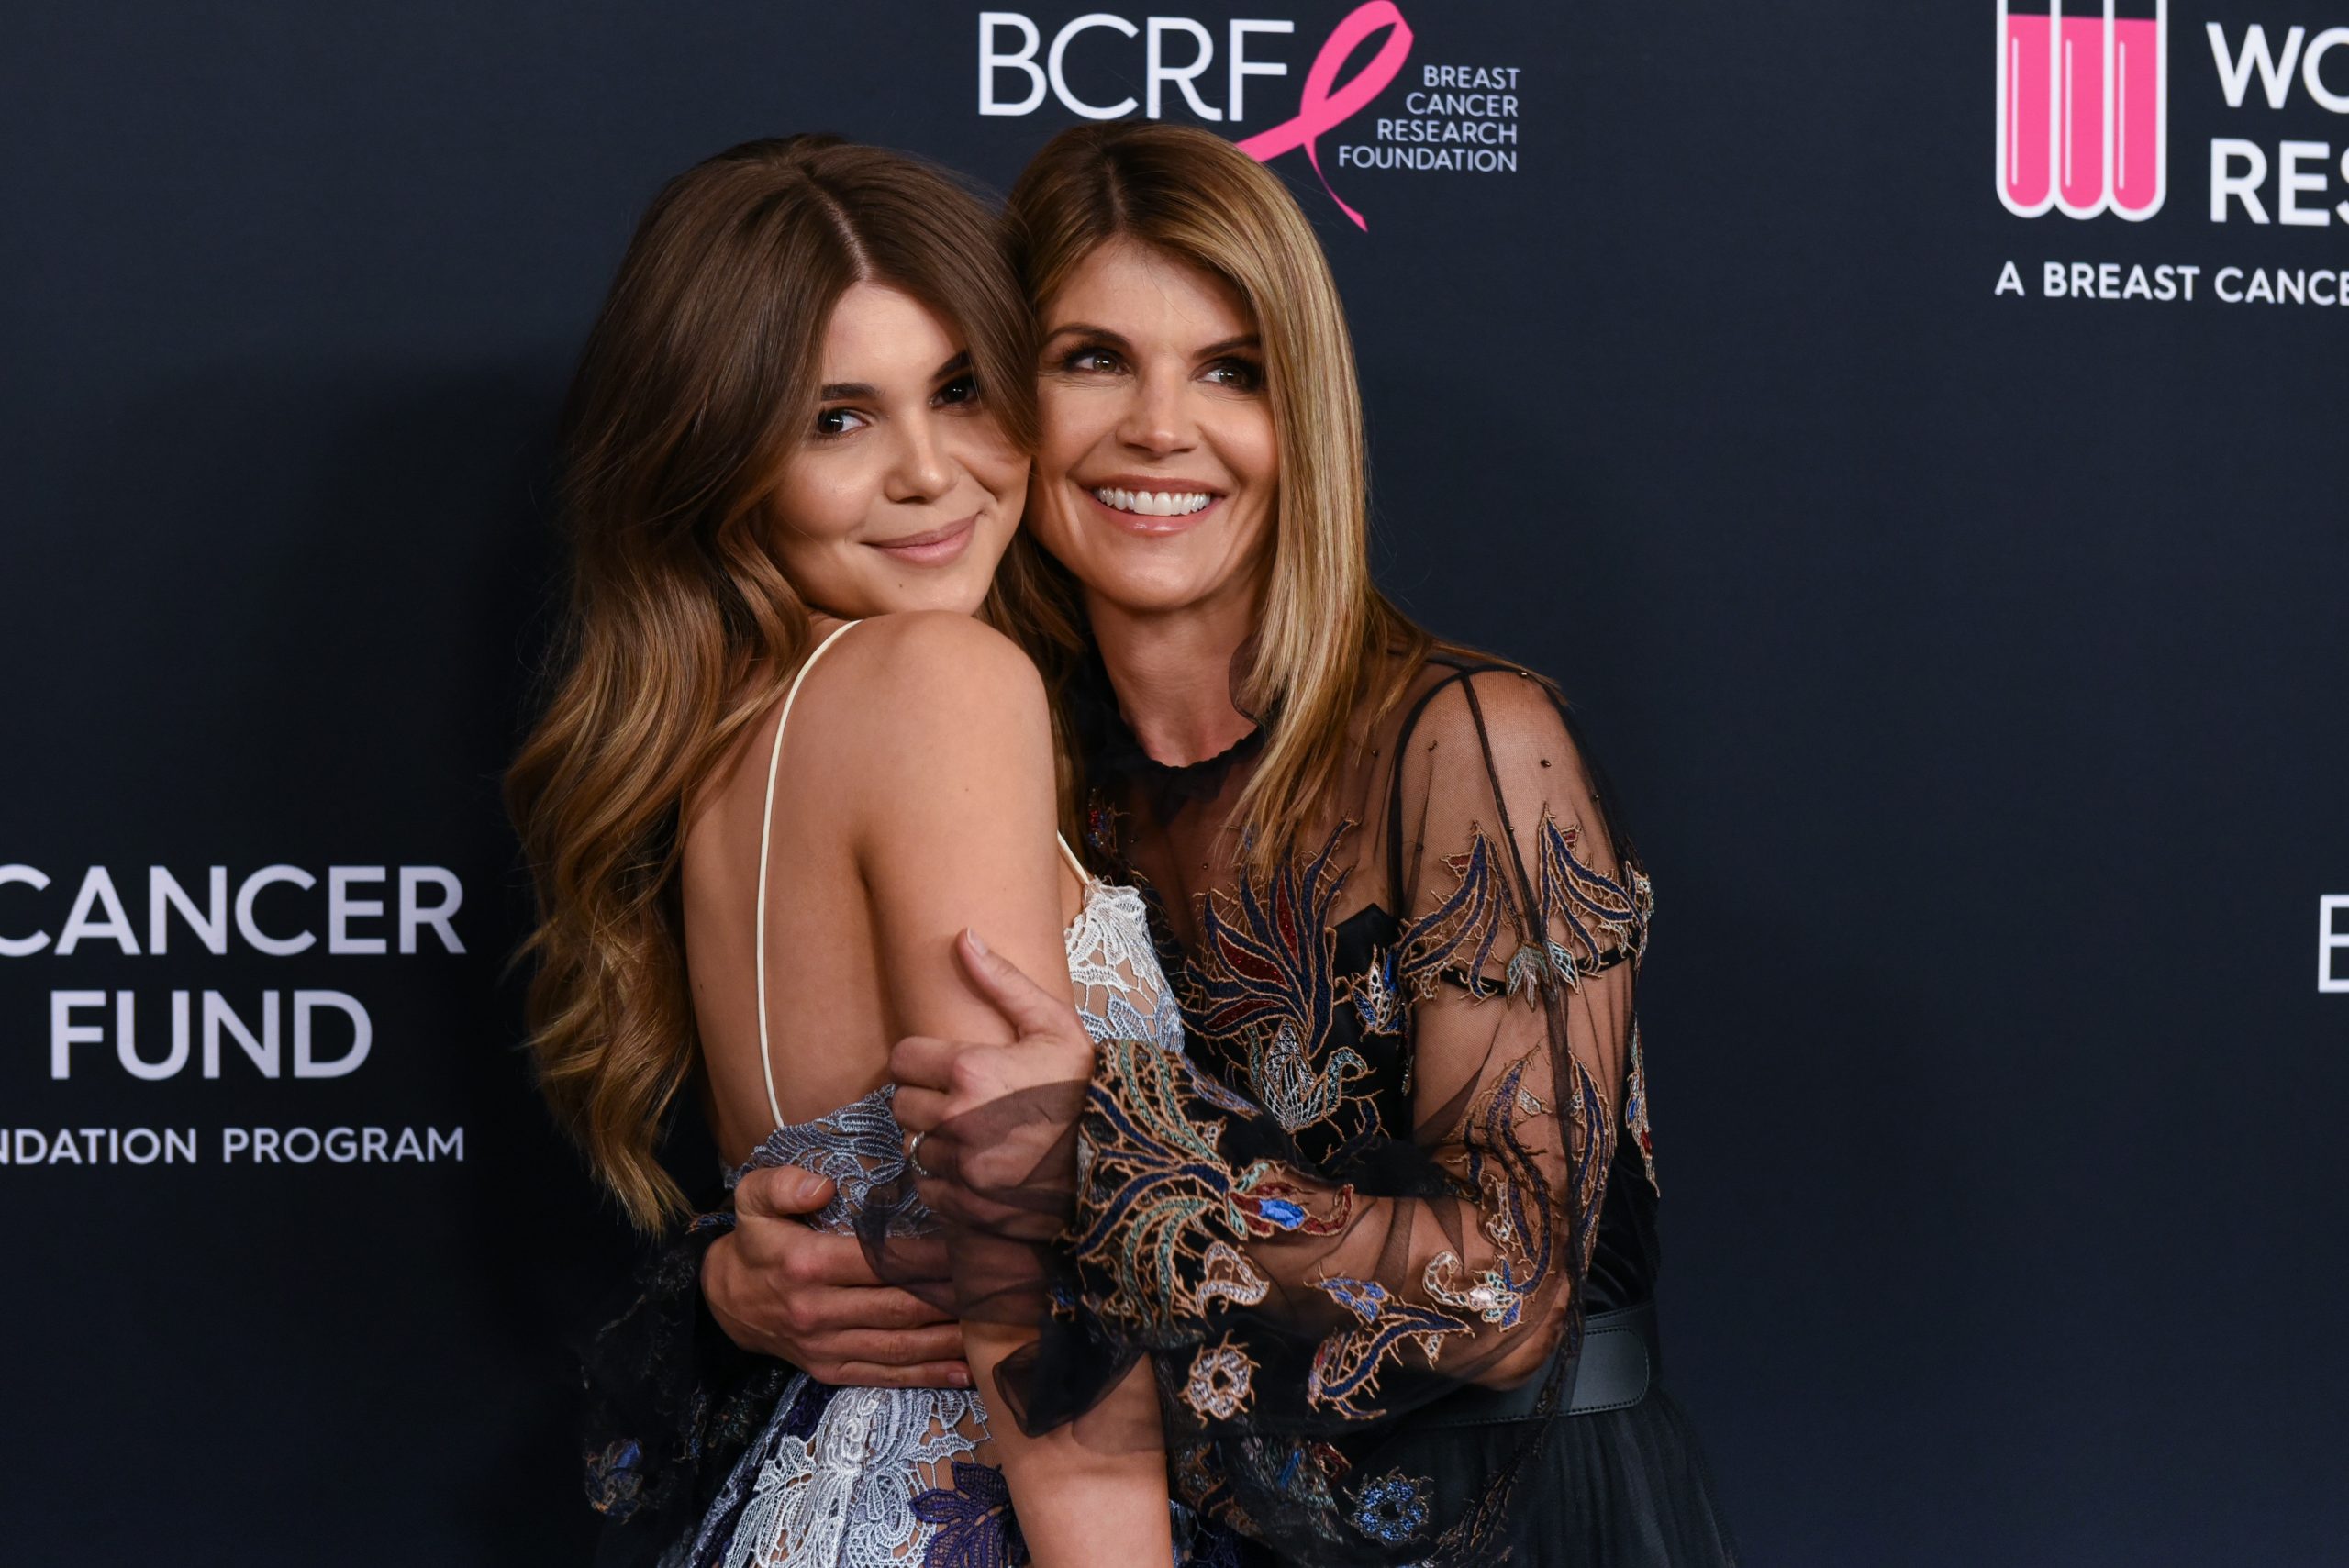 Olivia Jade’s ‘Red Table Talk’ Apology Didn’t Fix Her ‘Catastrophically Mangled’ Career as an Influencer, According To Brand Expert